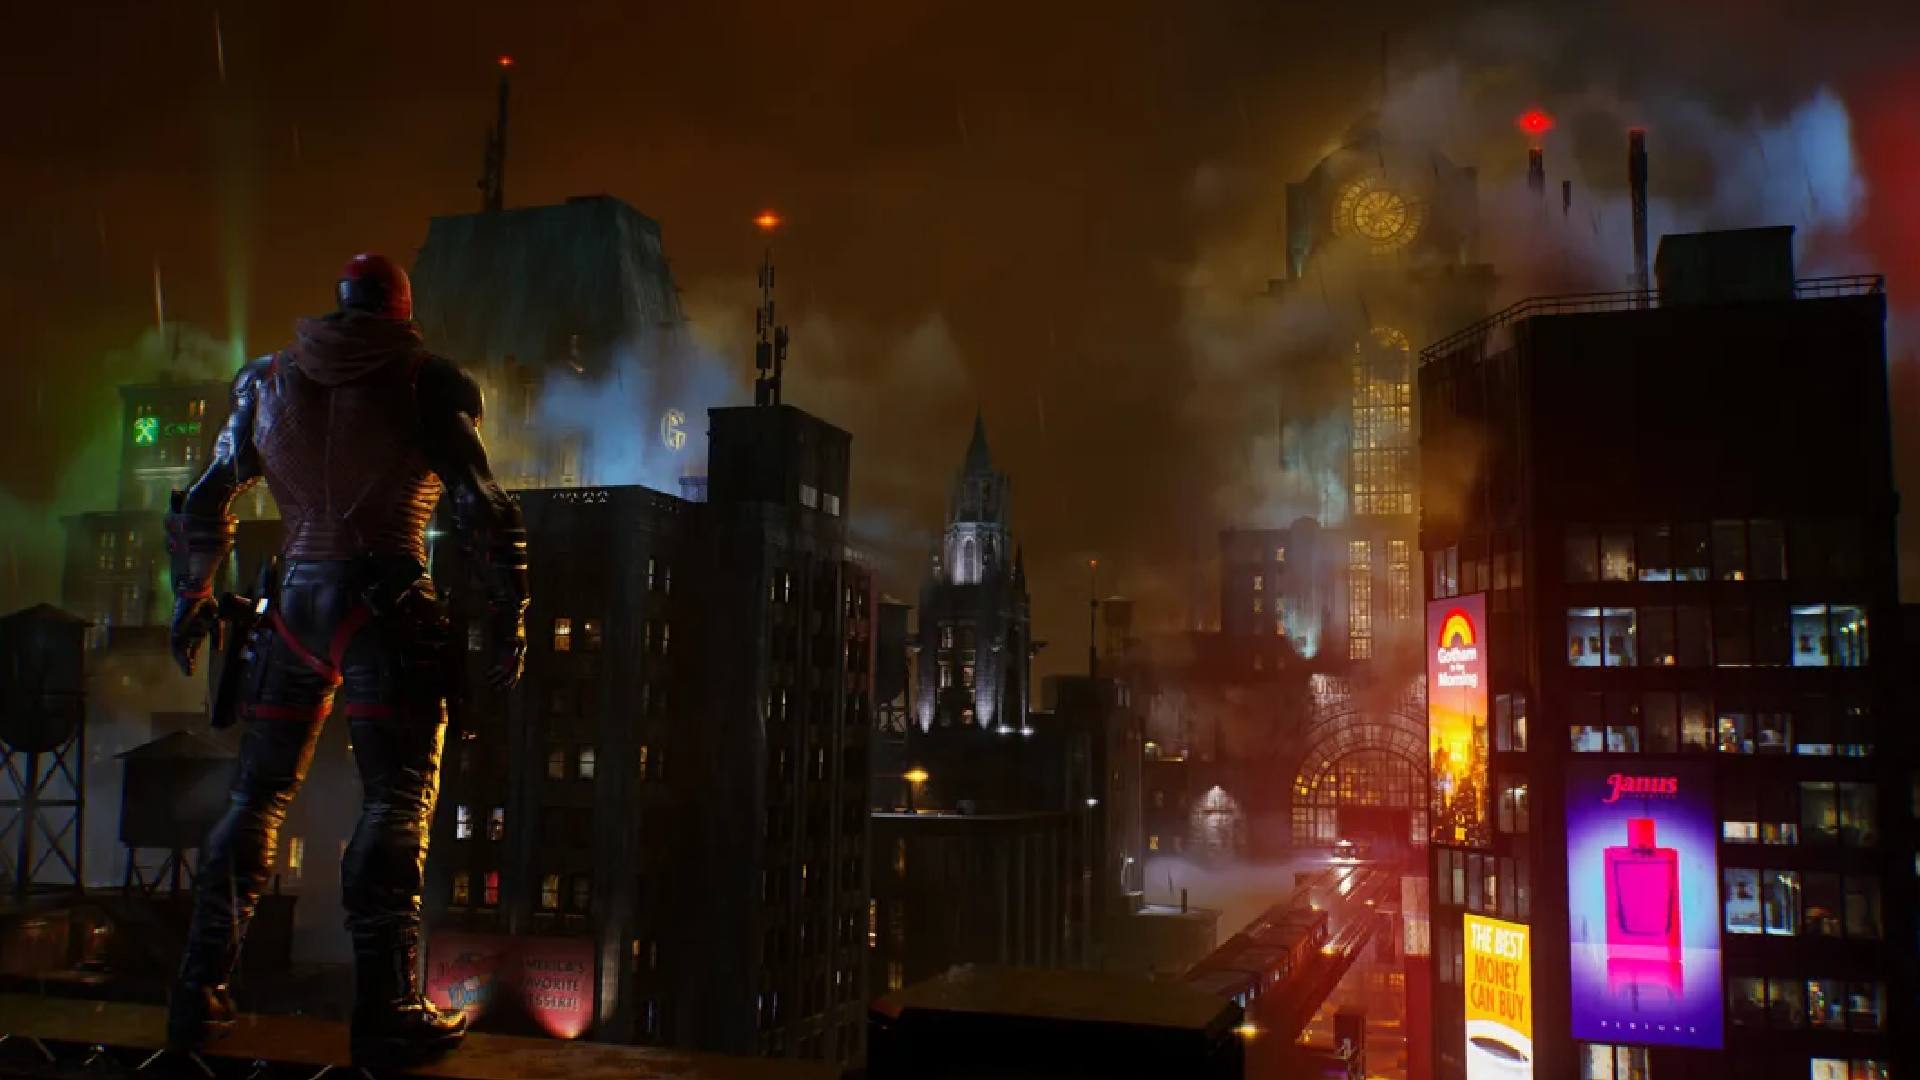 Gotham Knights co-op is “2-player campaign” but may have modes